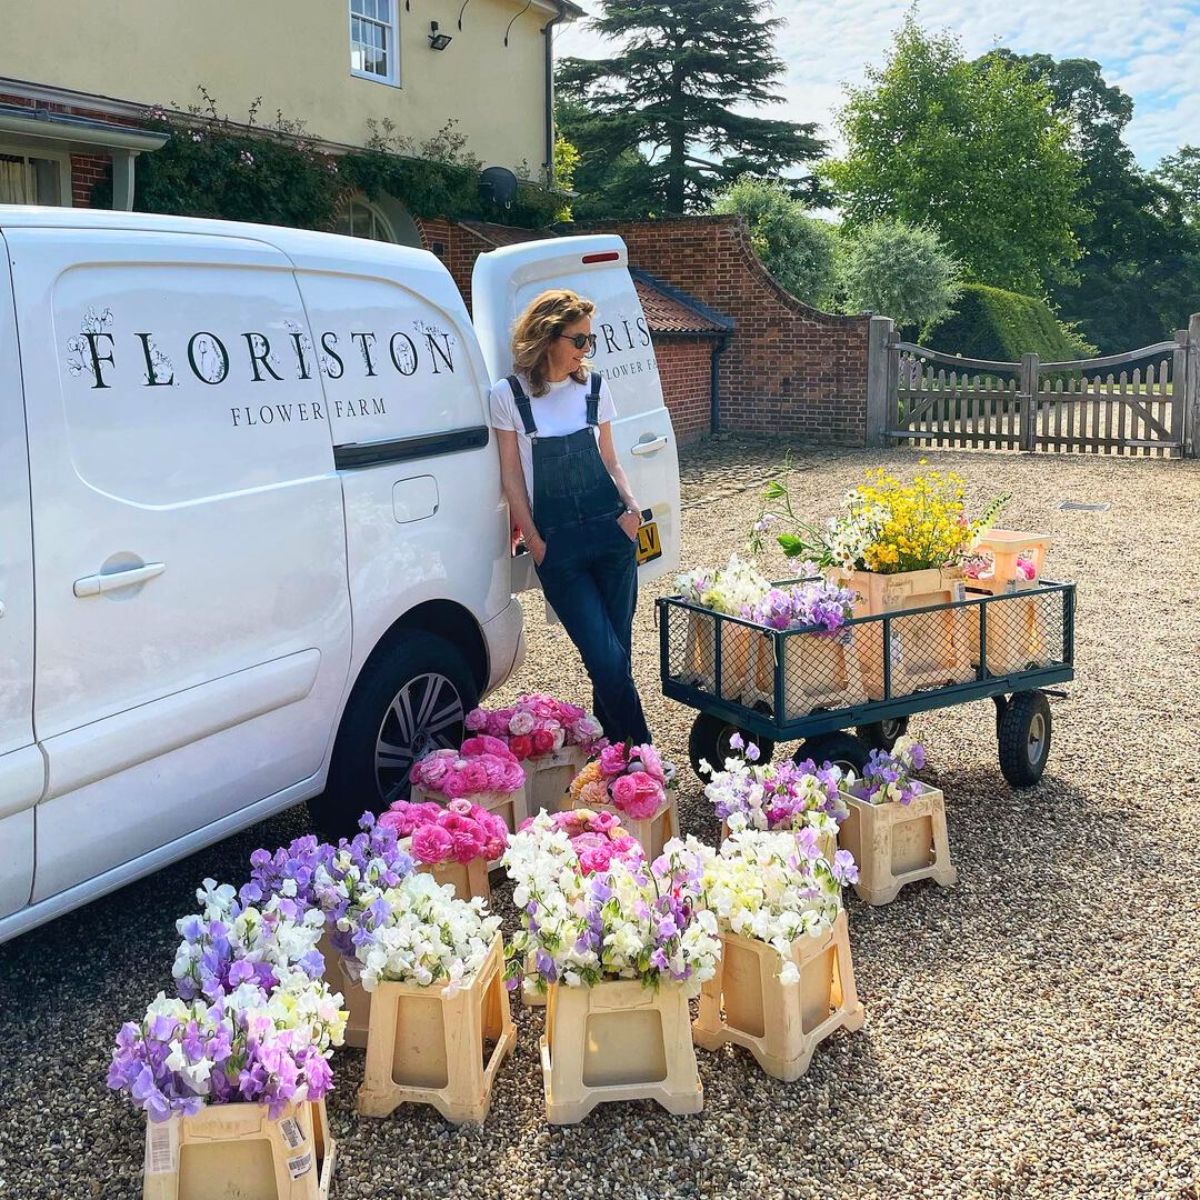 Floriston Flower Farm by Lucy and Amanda Vail